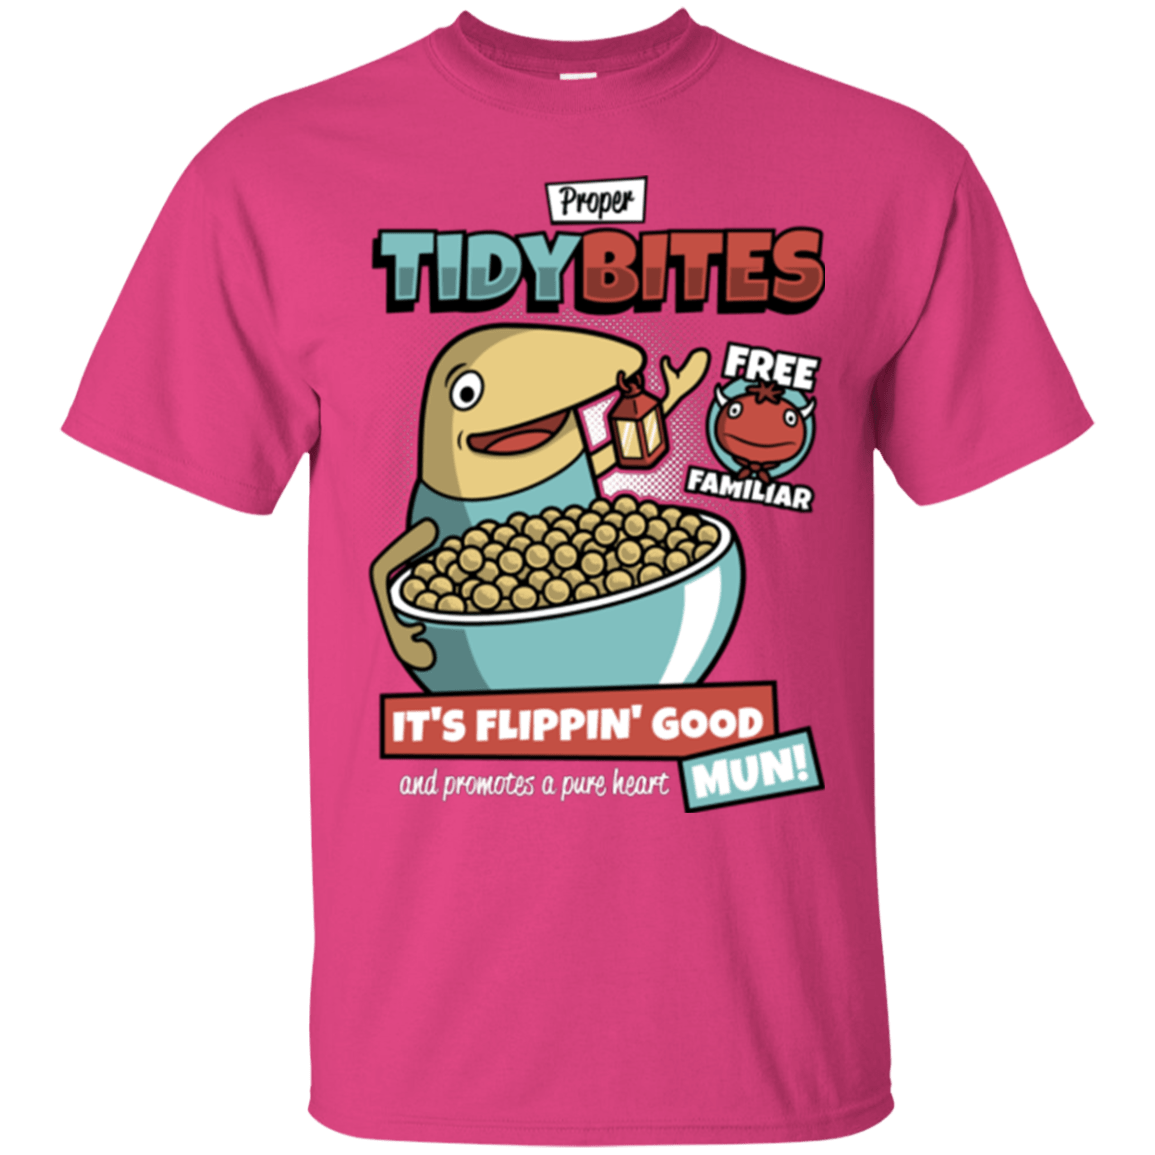 T-Shirts Heliconia / Small Proper Tidy Bites T-Shirt